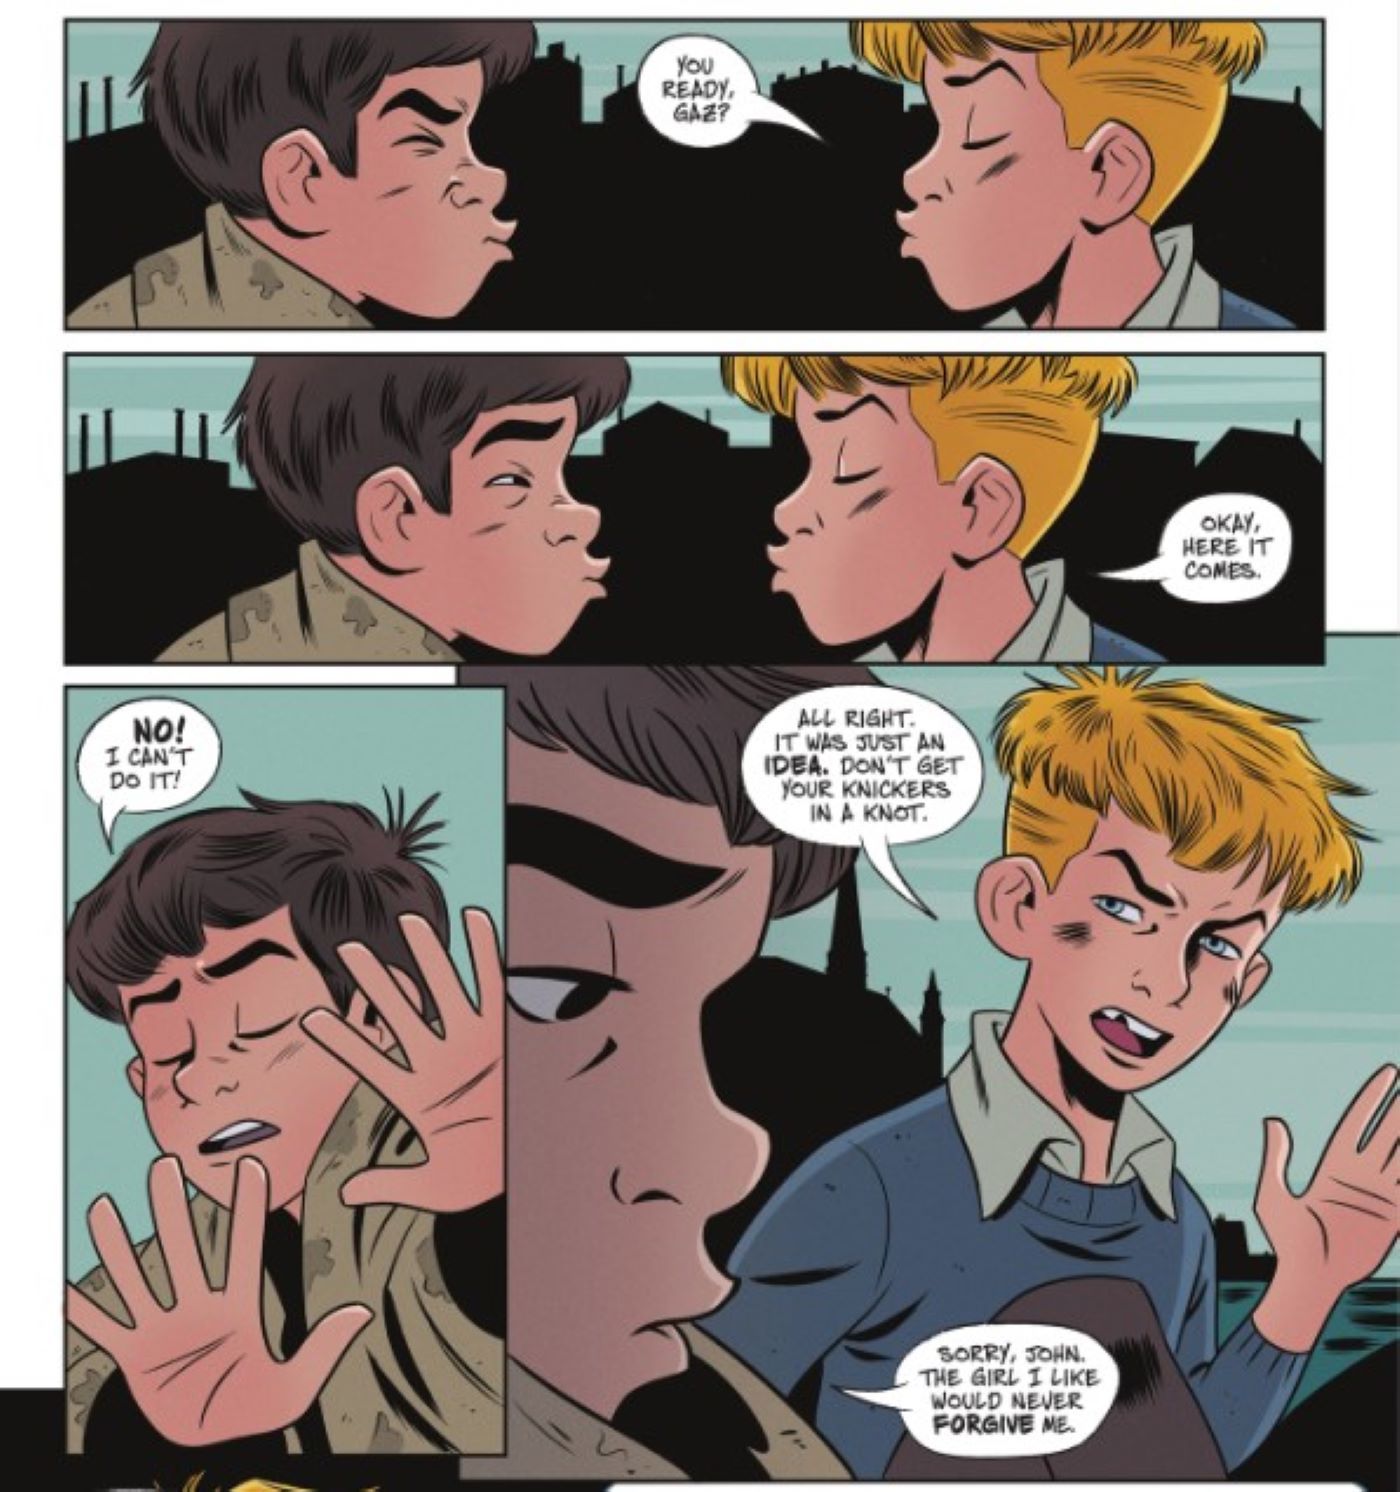 John Constantine and Gaz almost kiss in DC Valentine Special How to Lose Guy Gardner in 10 Days